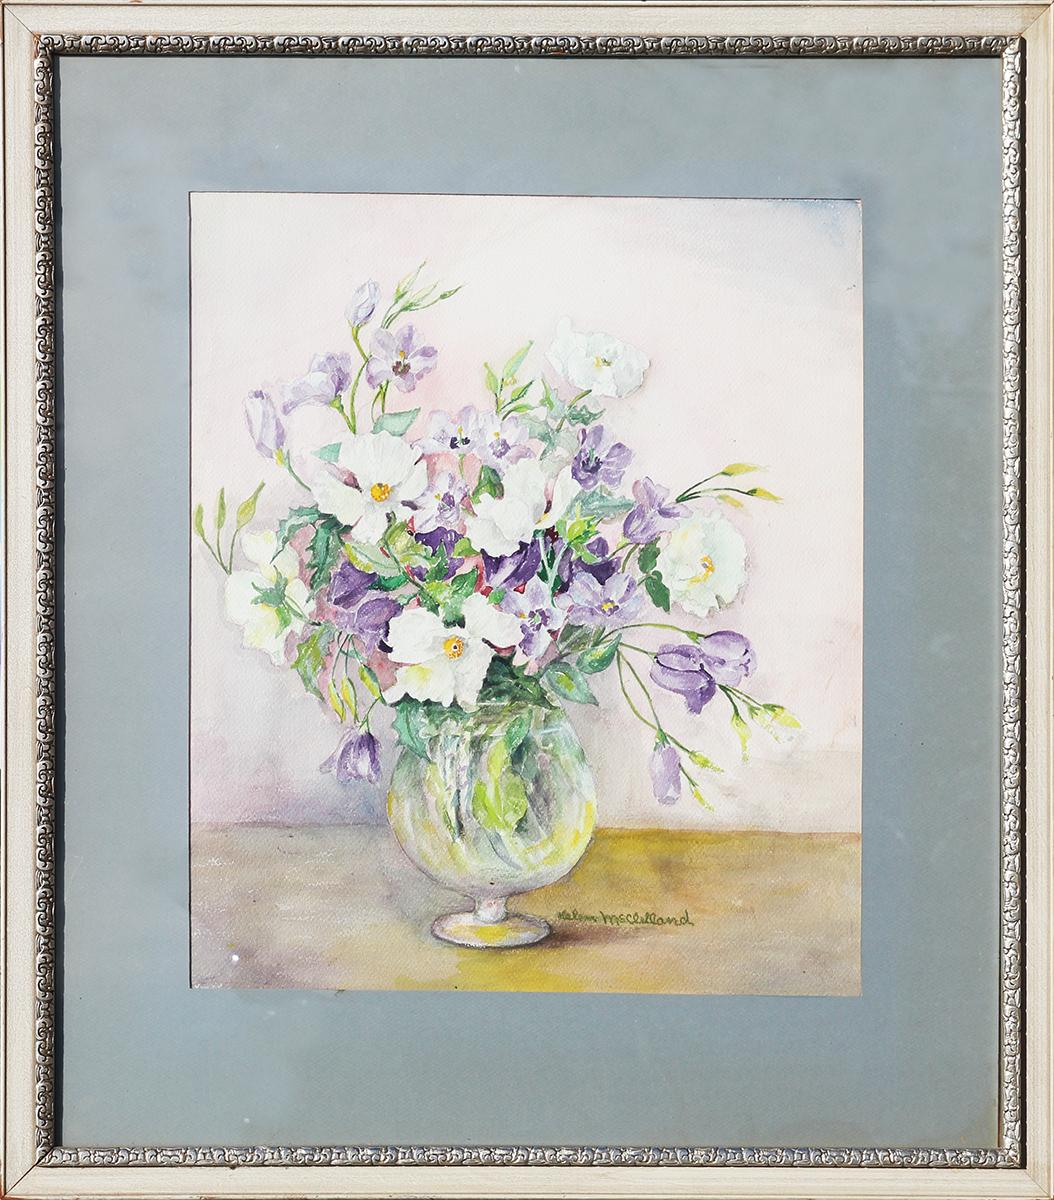 Helen McClelland Abstract Drawing - Small White and Purple Modernist Floral Still Life Irises Watercolor Painting 